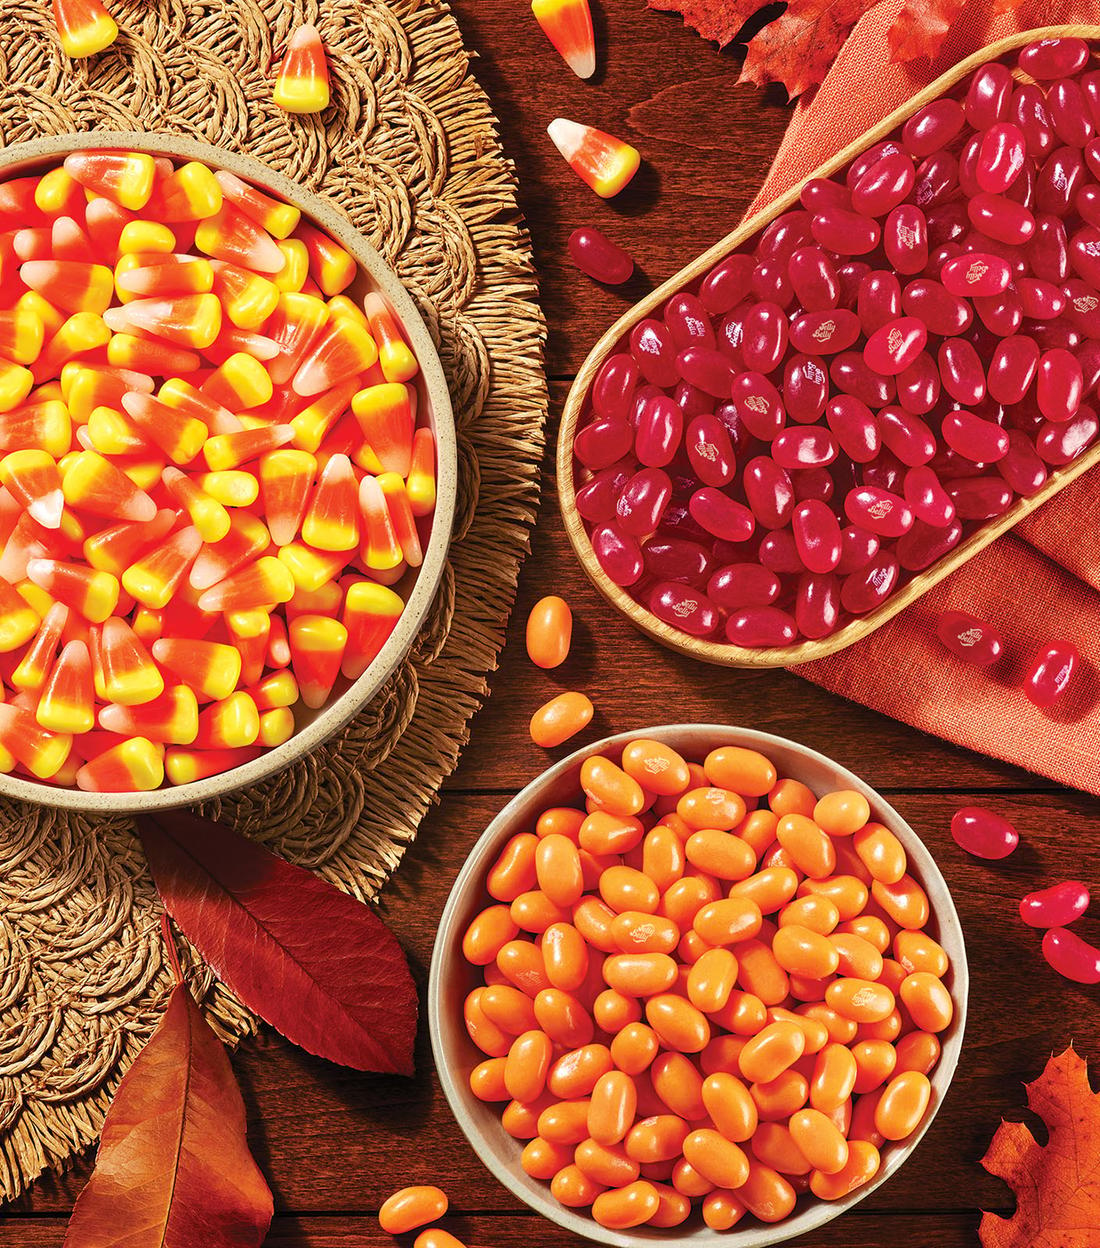 Bowls filled with Candy Corn, Orange and red Jelly Beans on a brown table